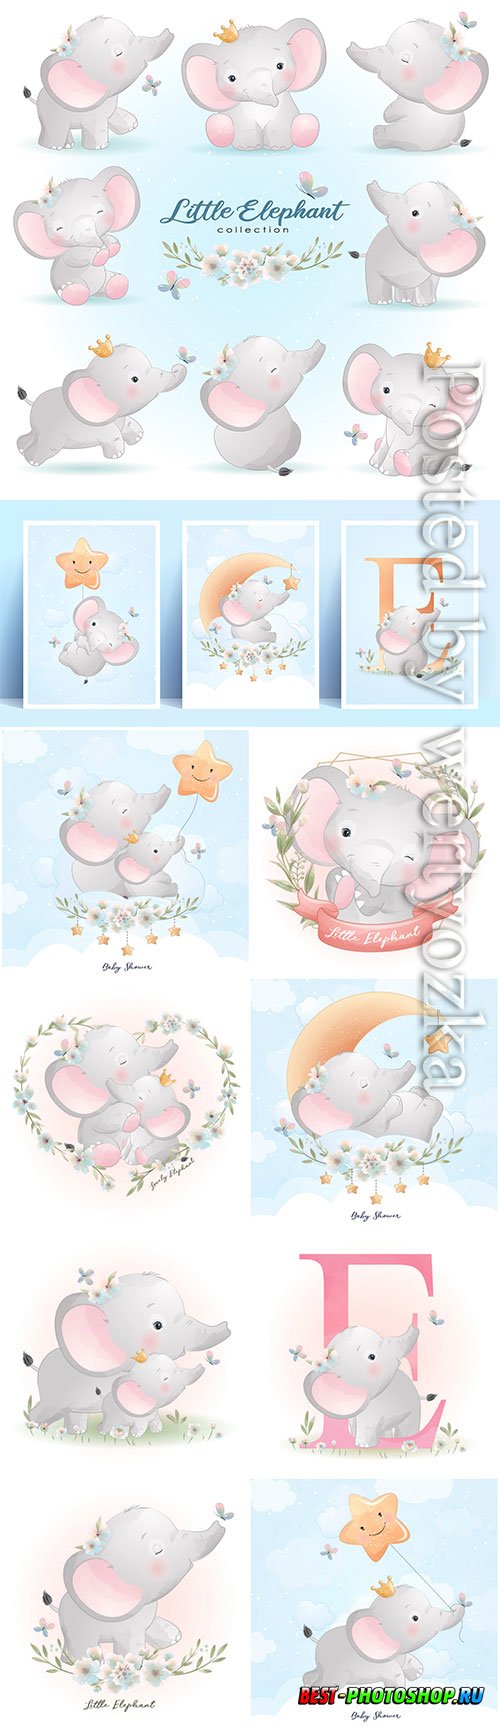 Cute doodle elephant poses with floral illustration premium vector